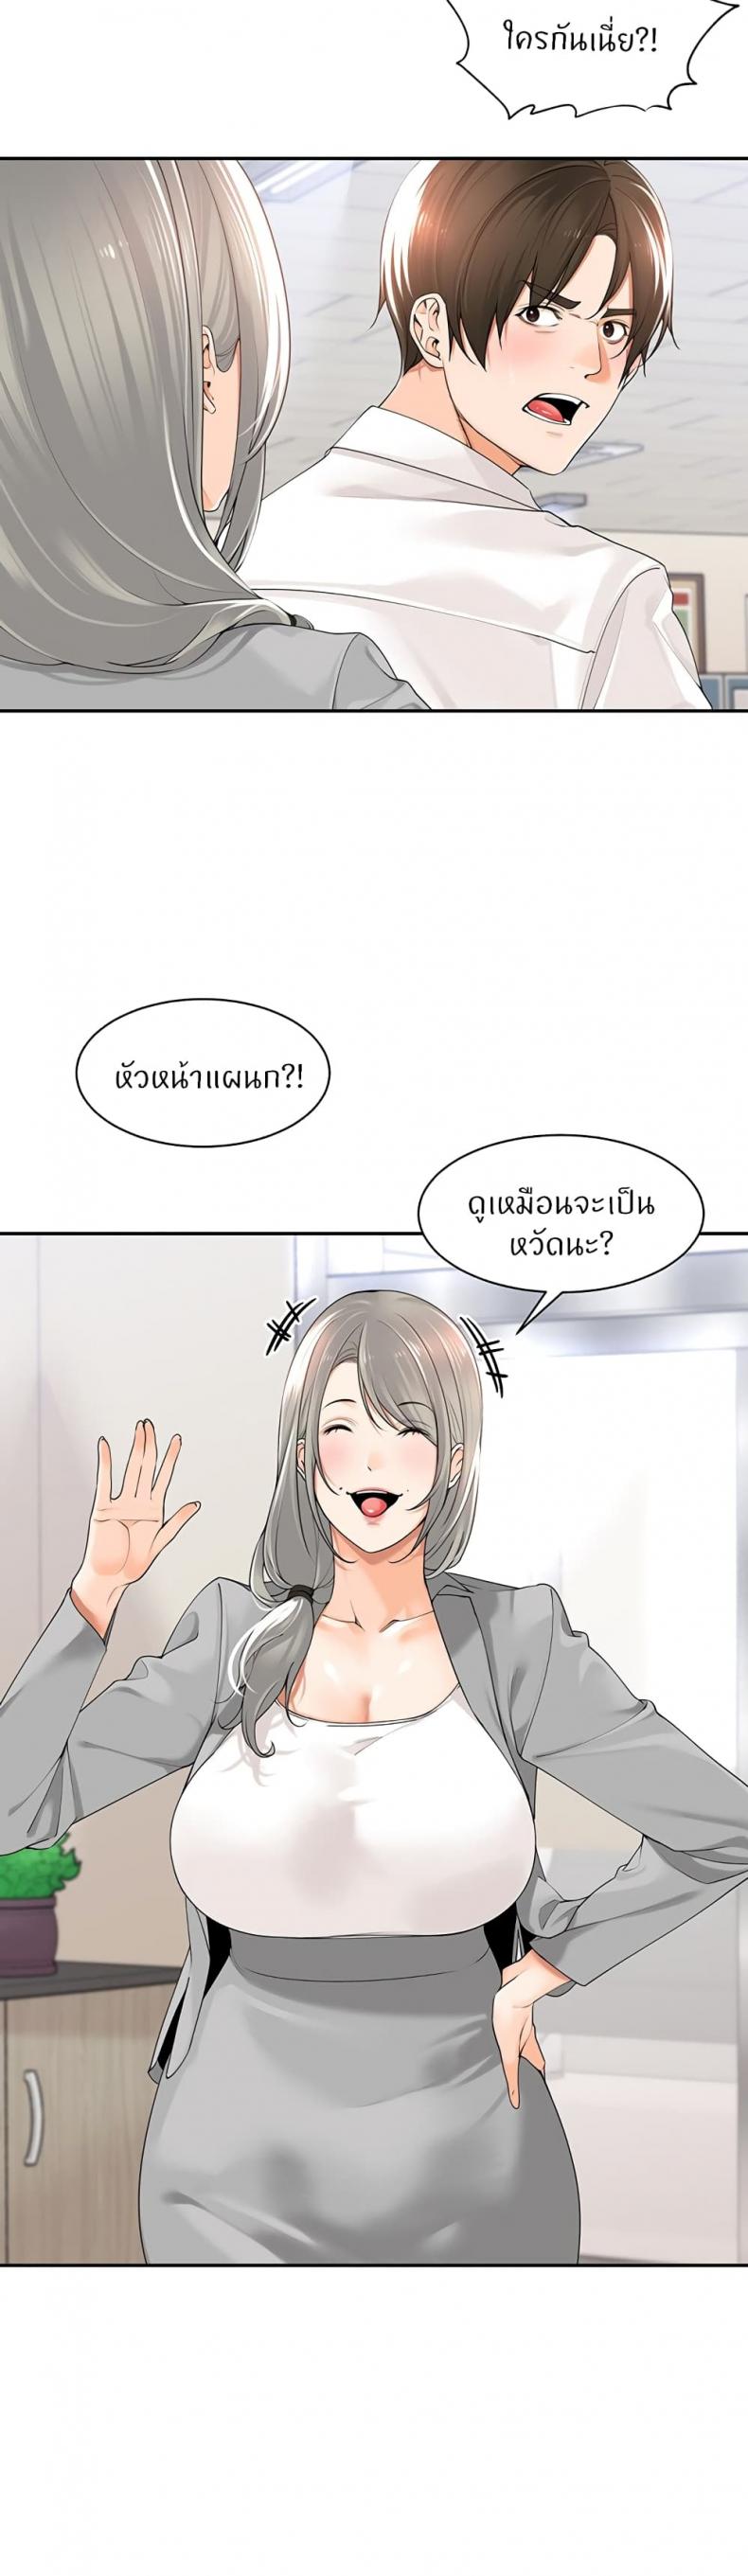 Manager, Please Scold Me 17 ภาพที่ 6